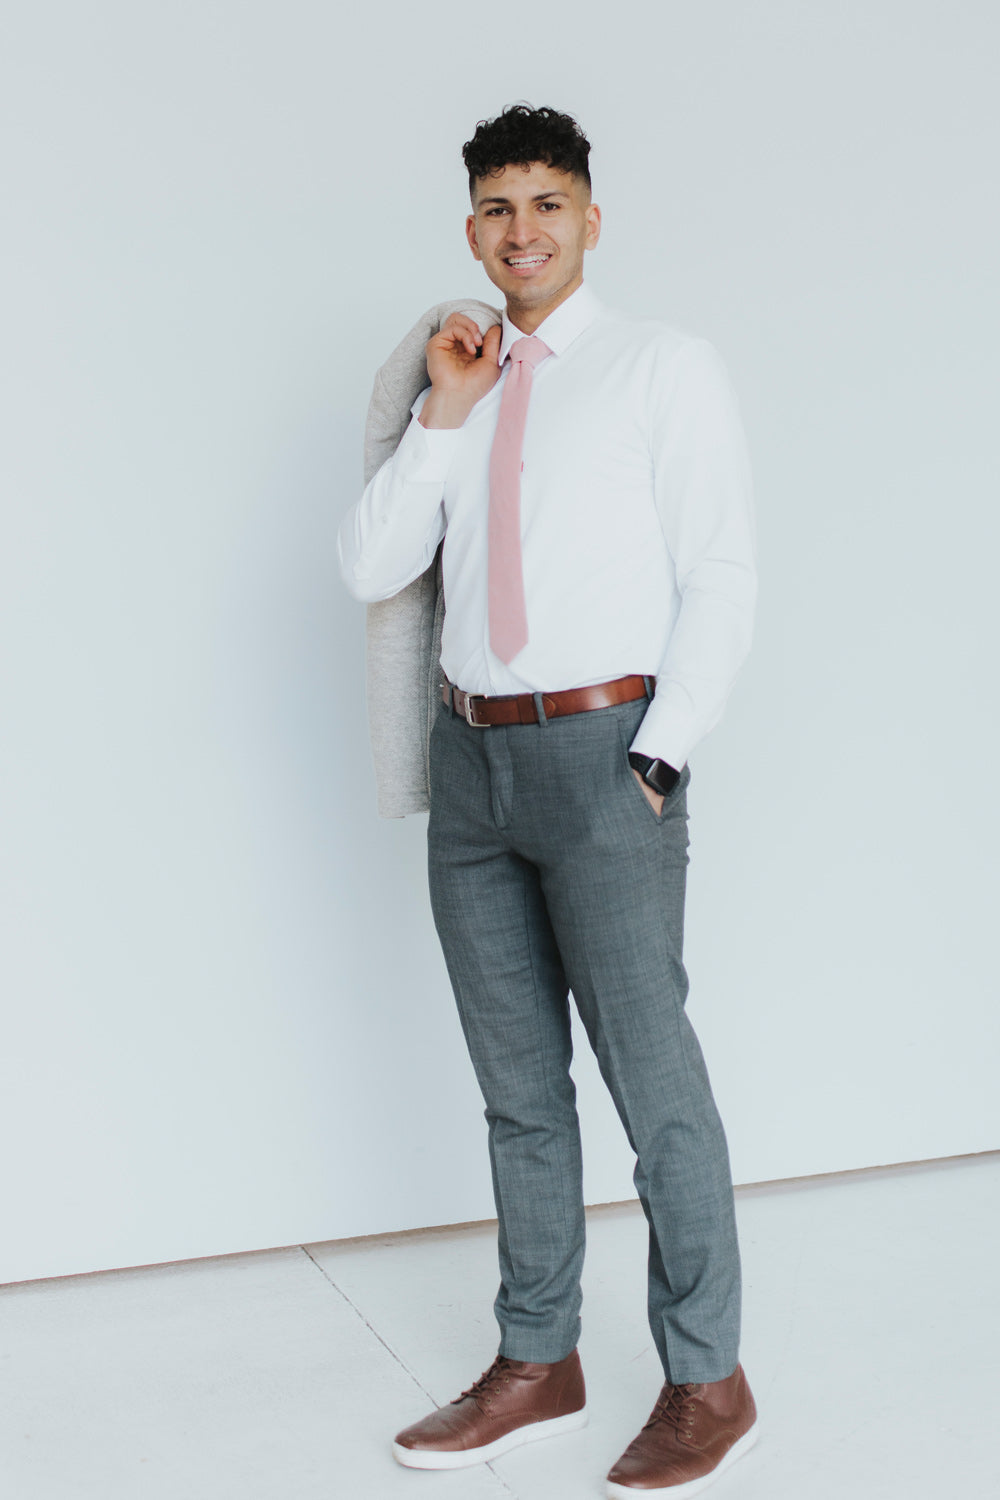 Blush Tie worn with a white shirt, brown belt and gray pants.